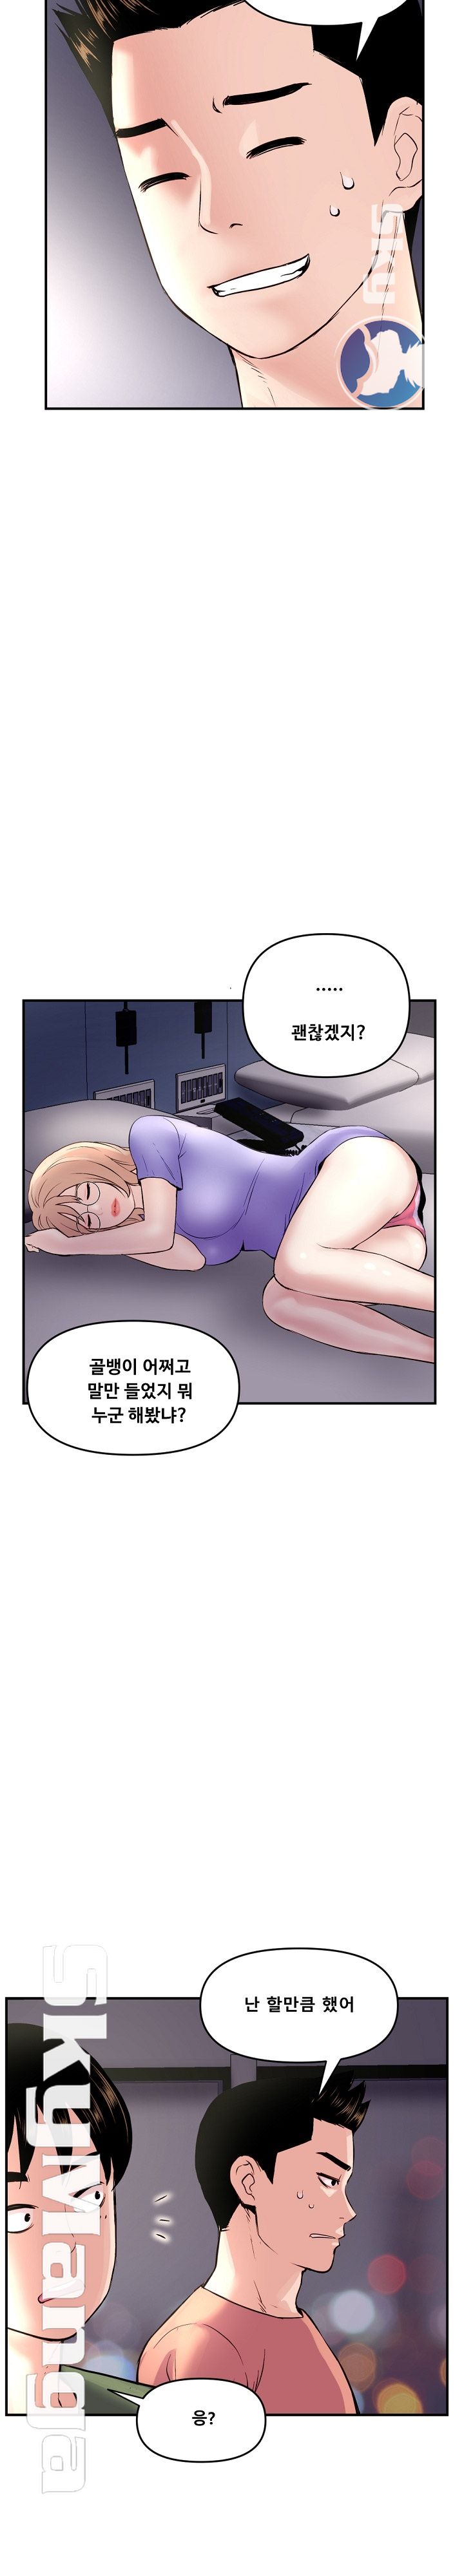 Late night PC Room Raw - Chapter 6 Page 3